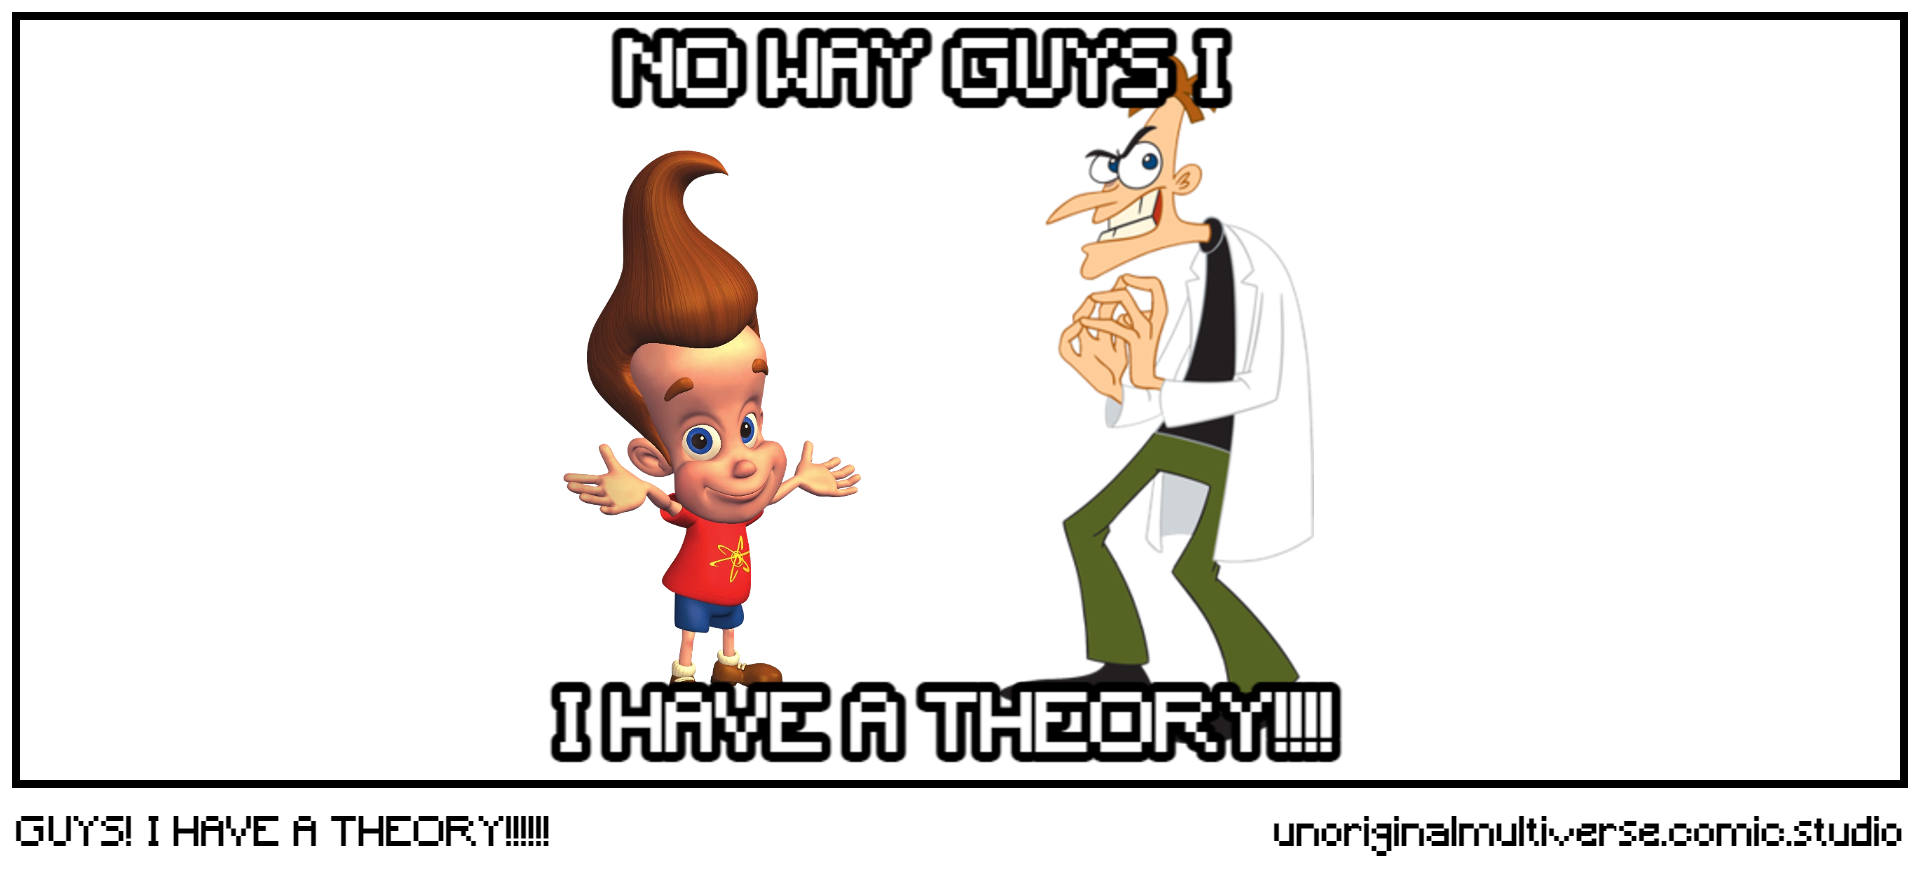 GUYS! I HAVE A THEORY!!!!!!